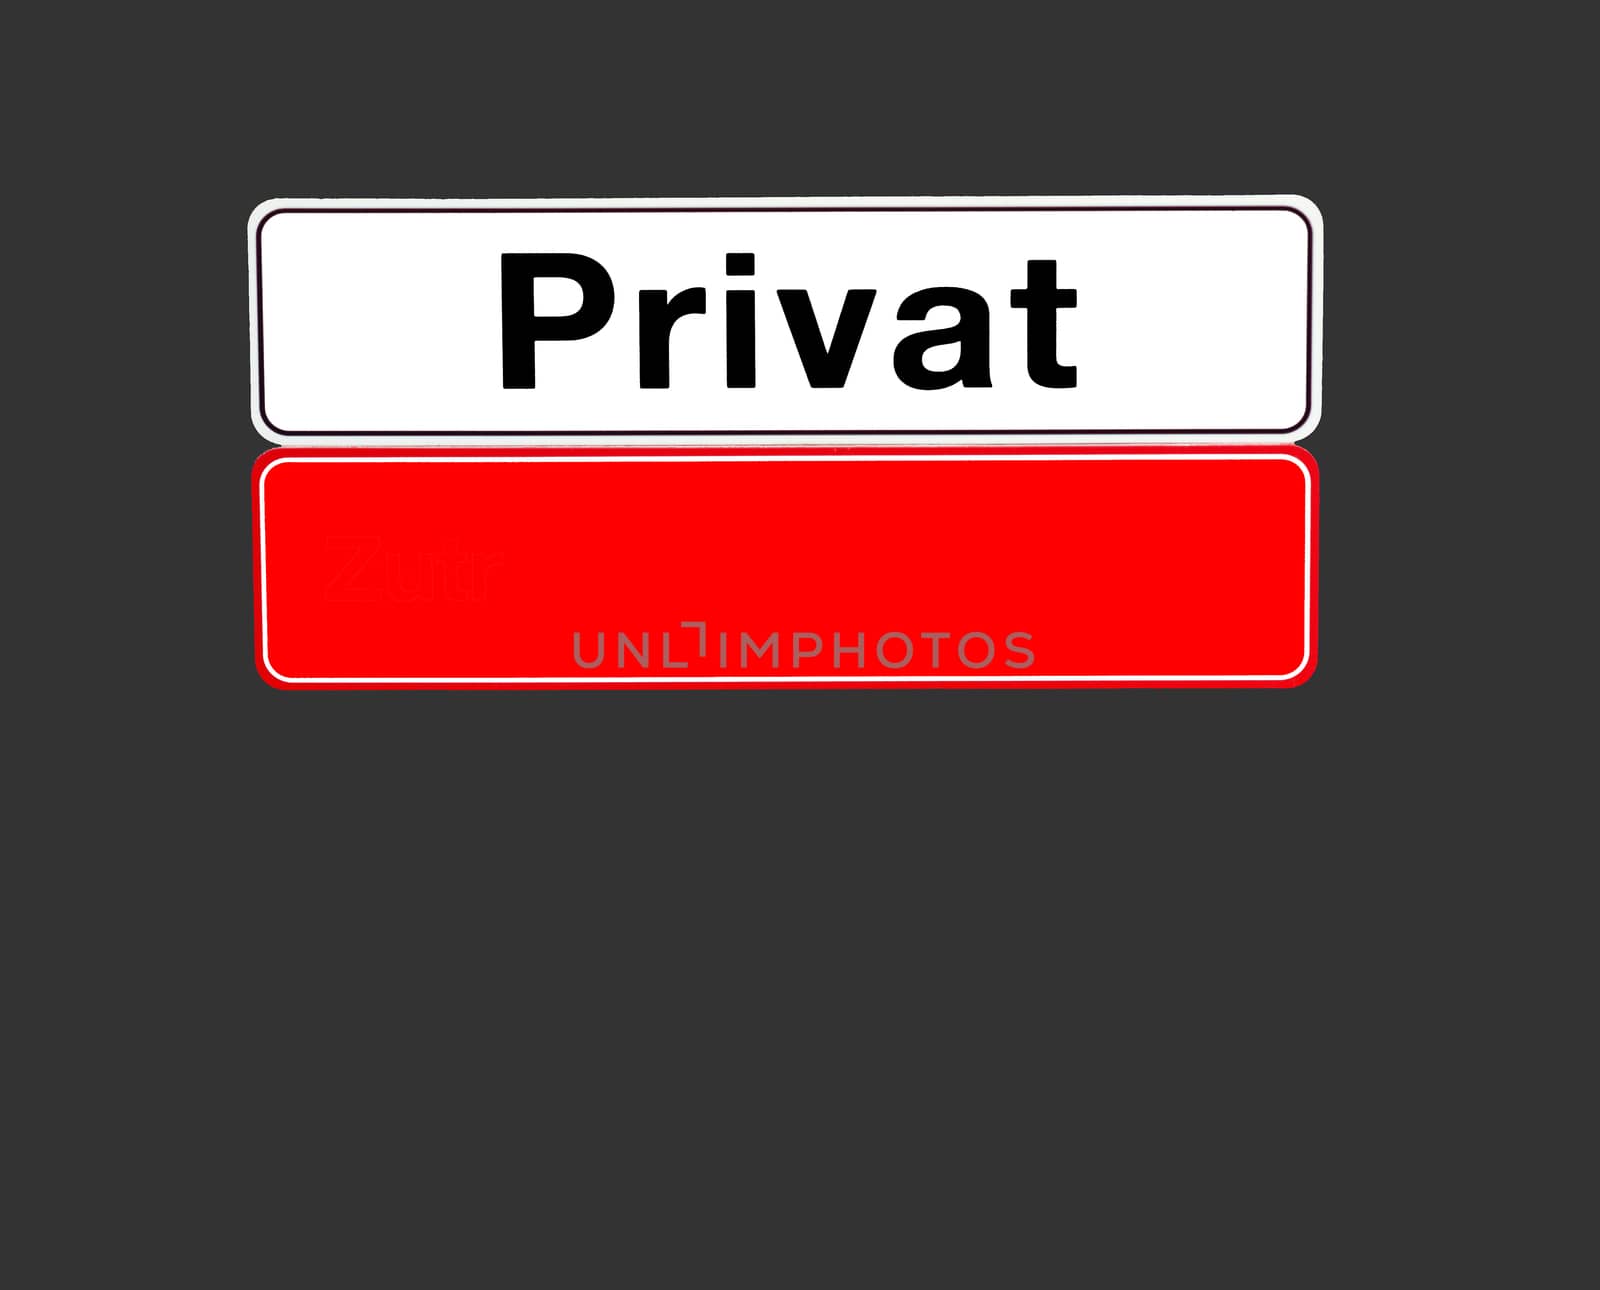 Plate Private by Fr@nk